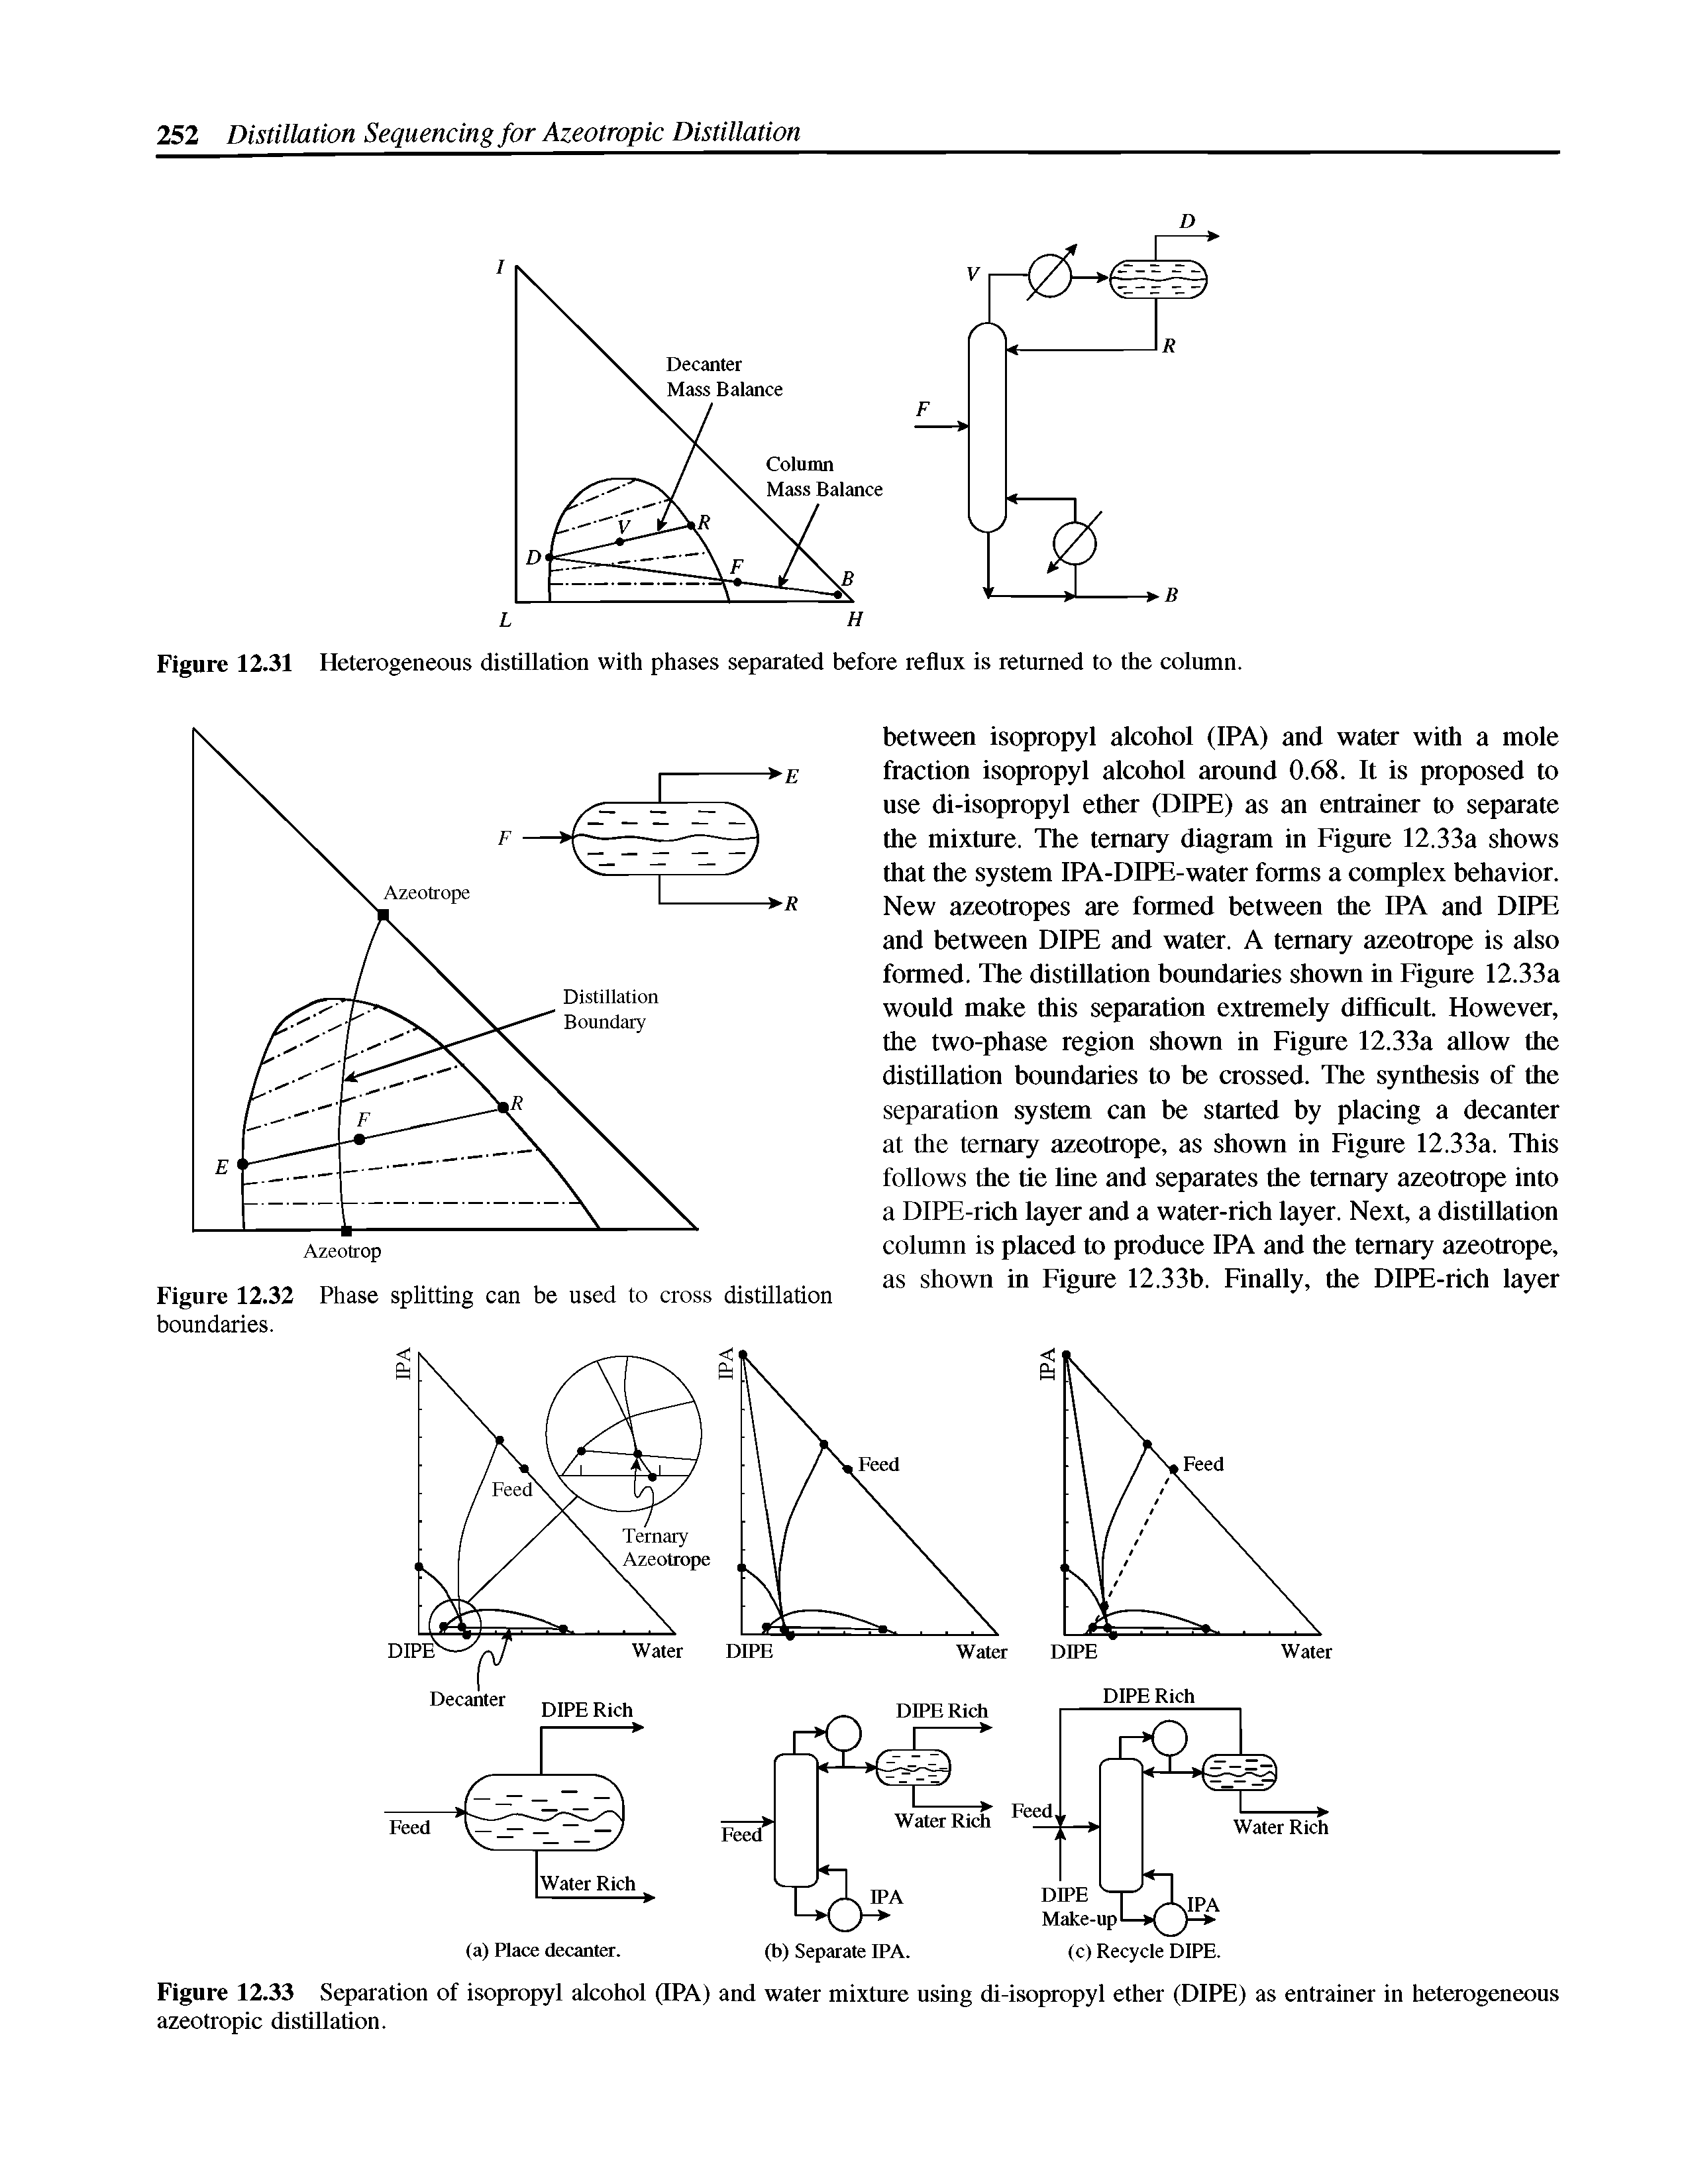 Figure 12.33 Separation of isopropyl alcohol (IPA) and water mixture using di-isopropyl ether (DIPE) as entrainer in heterogeneous azeotropic distillation.